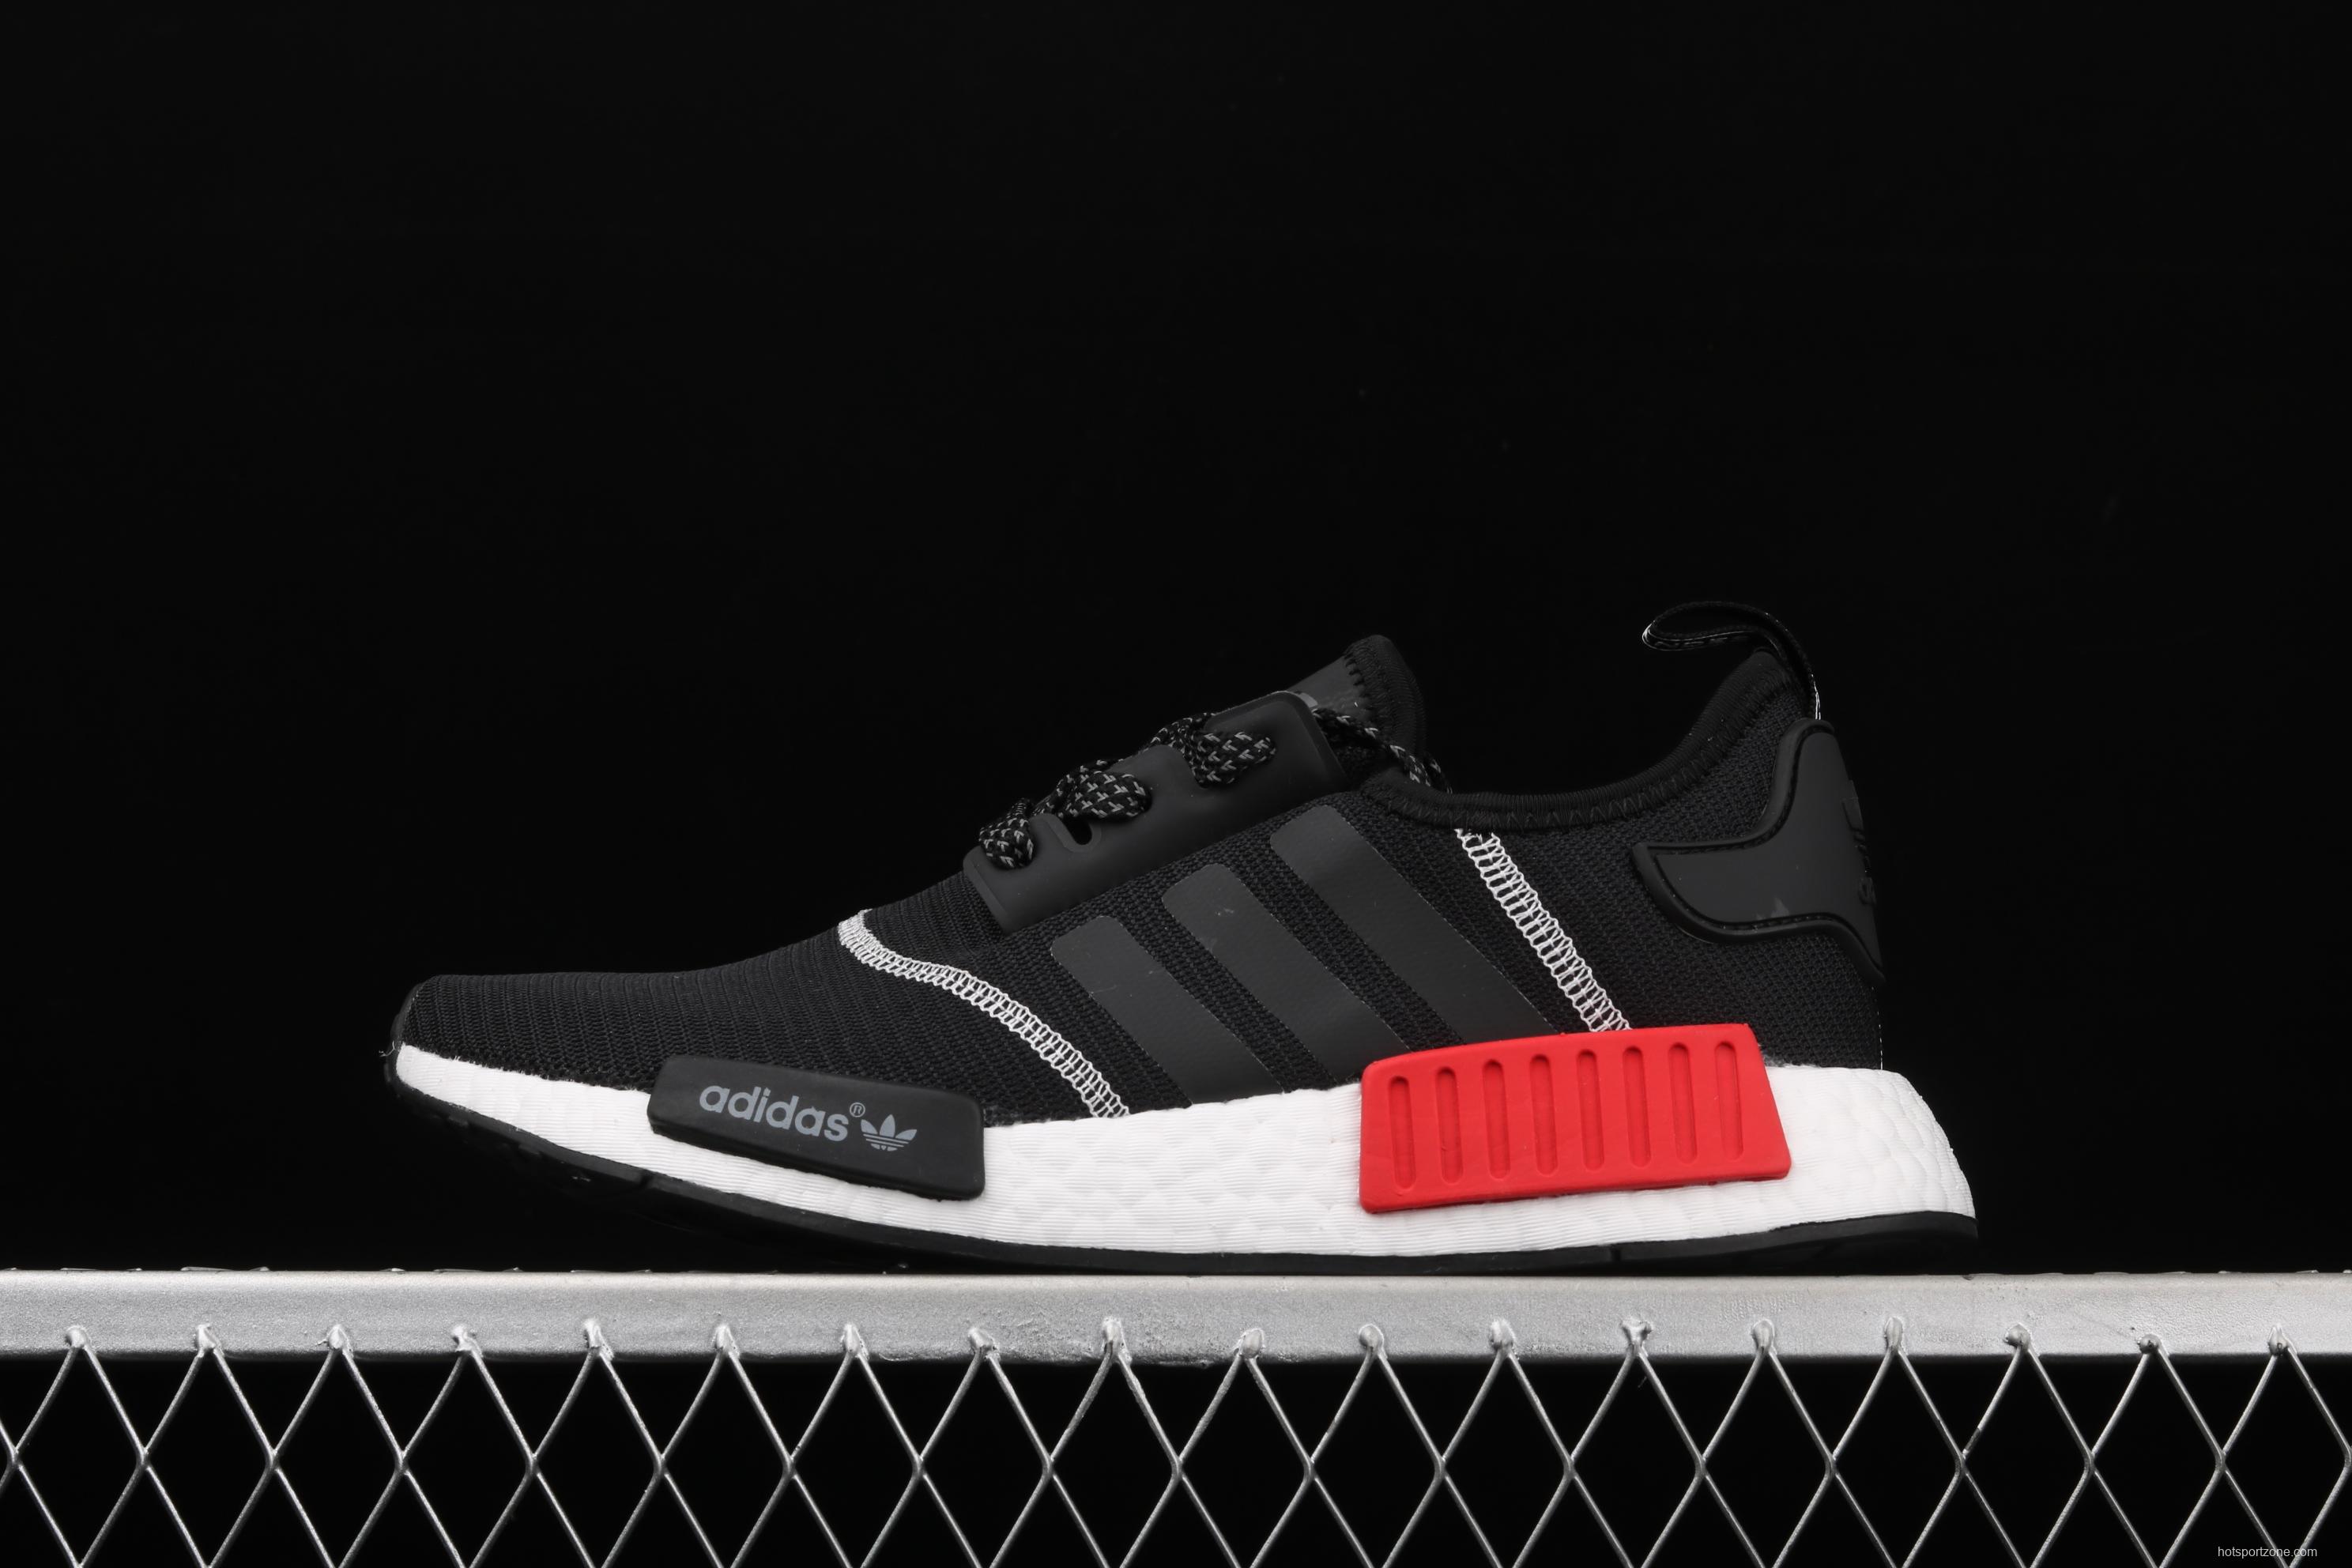 Adidas NMD R1 Boost S31510 new really hot casual running shoes